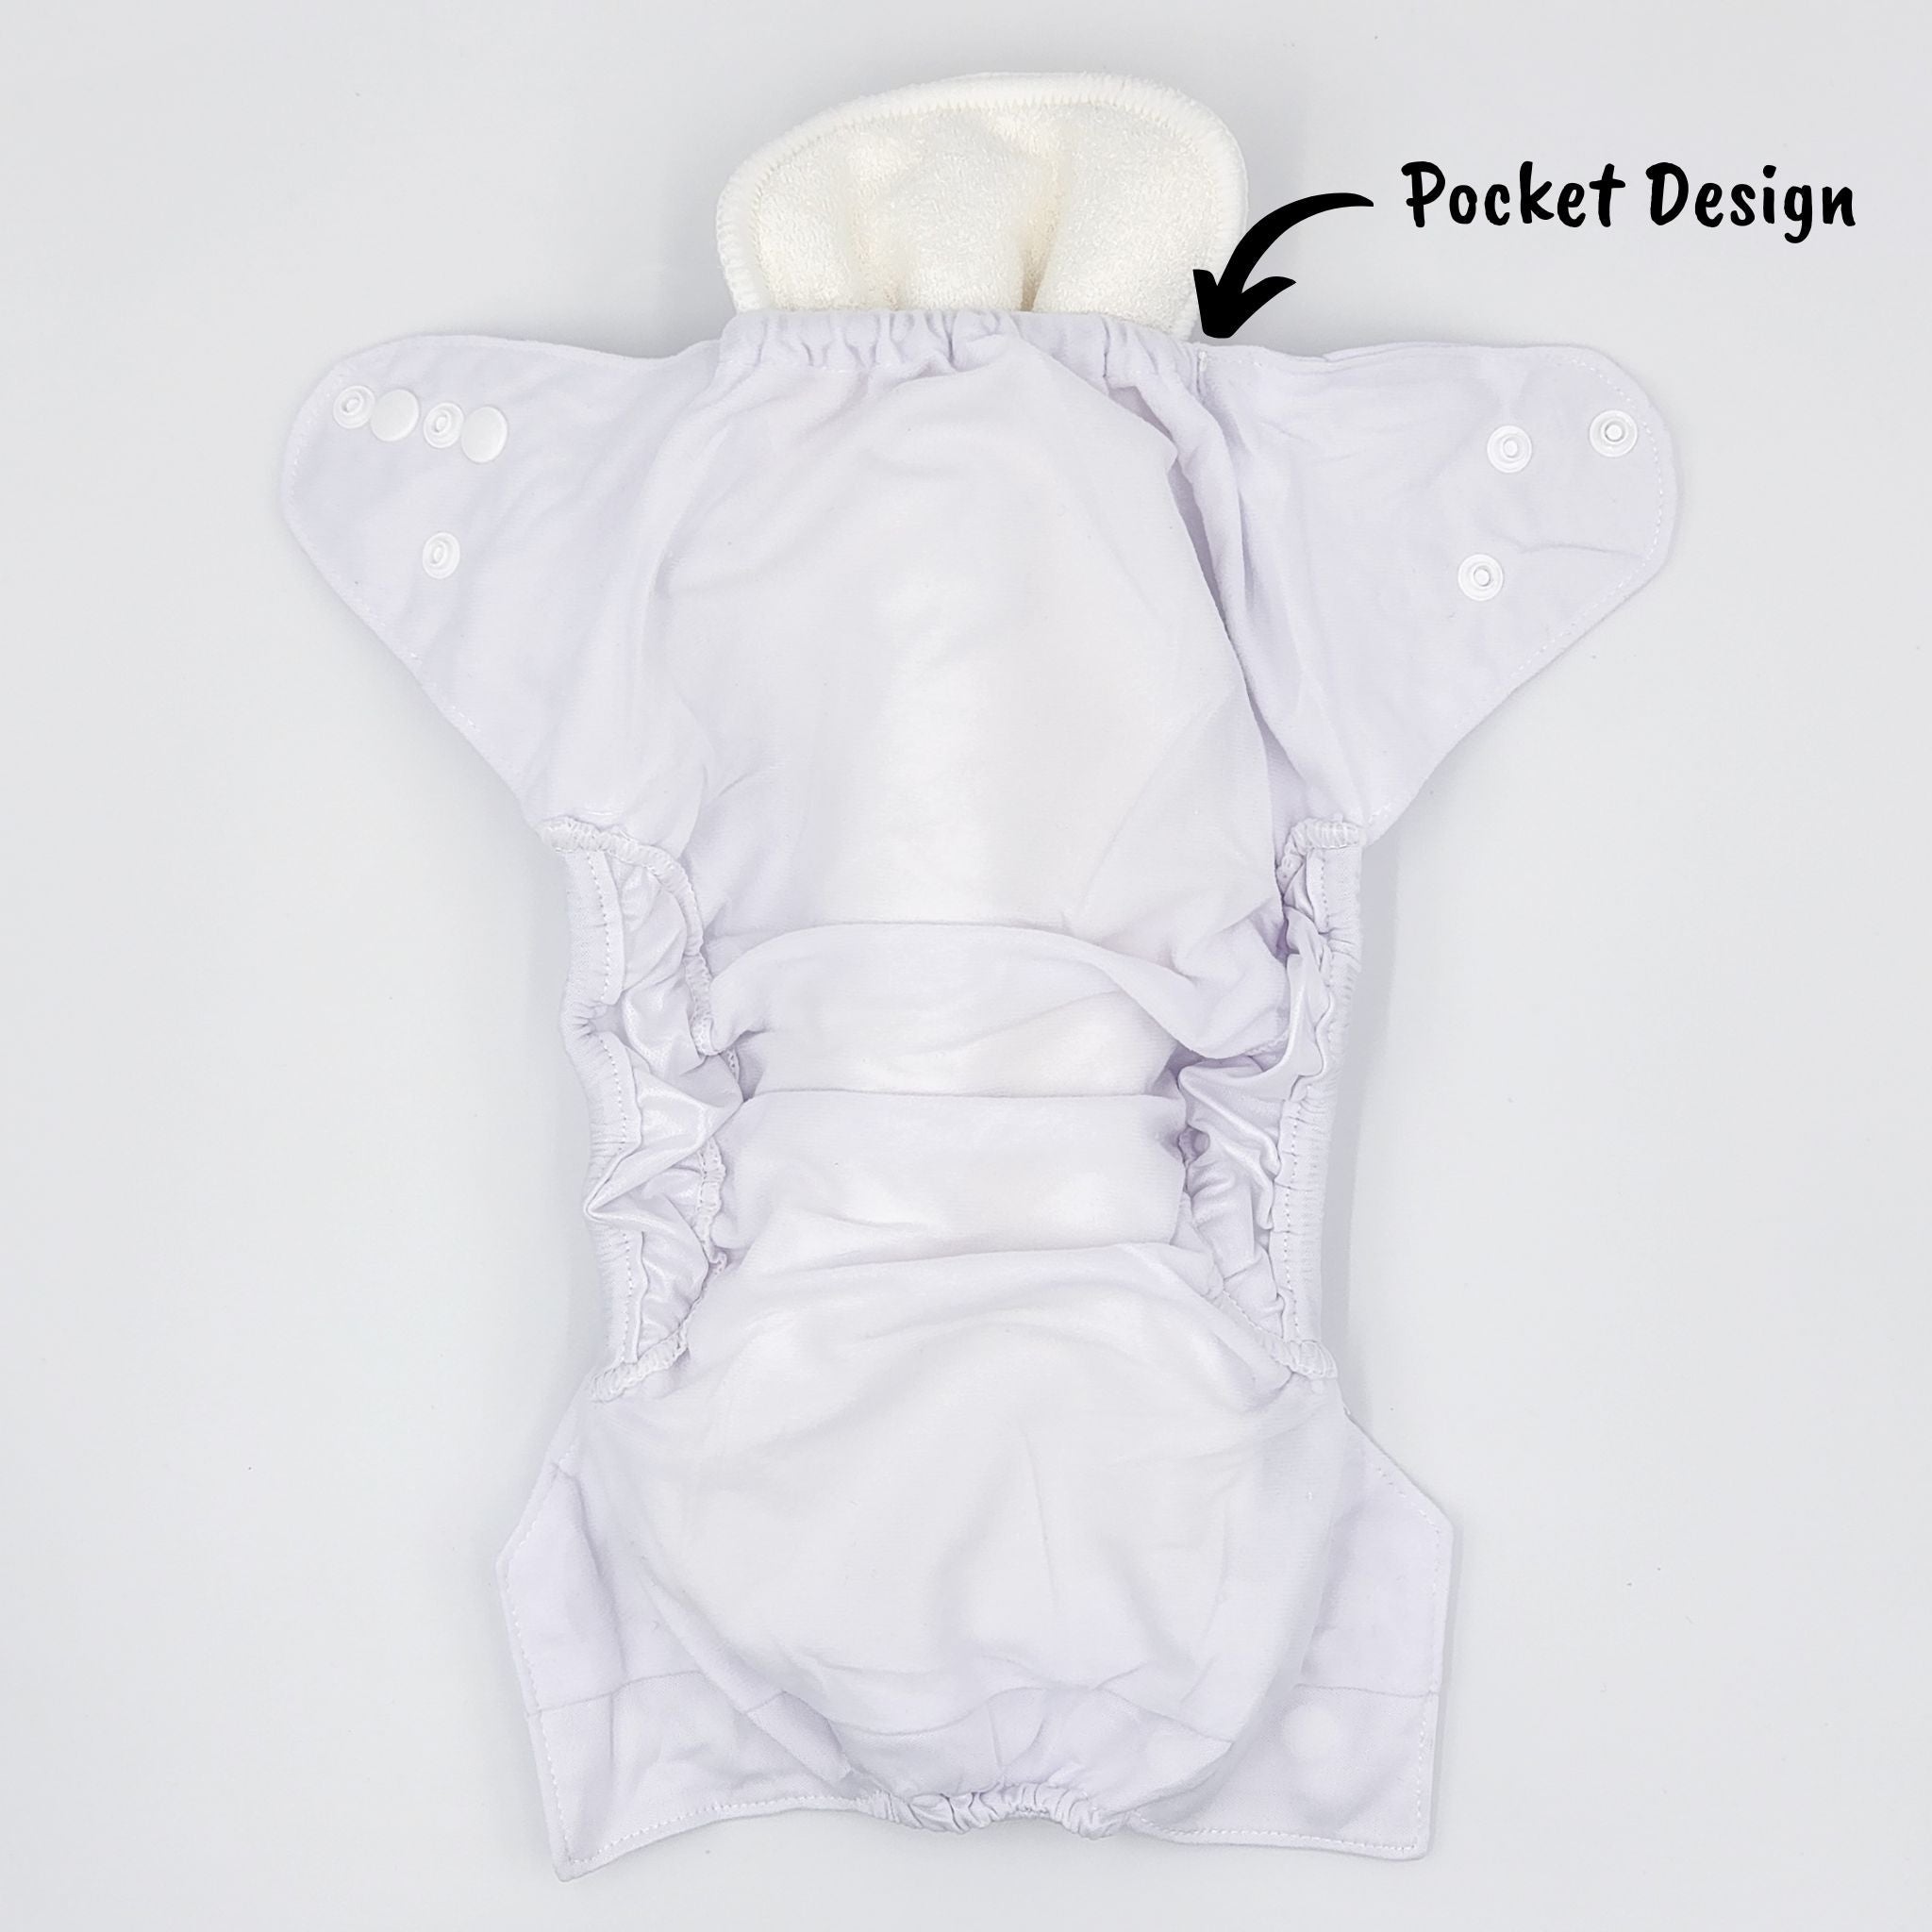 Reusable Modern Cloth Nappy 2.0 - White - Be Bliss Baby